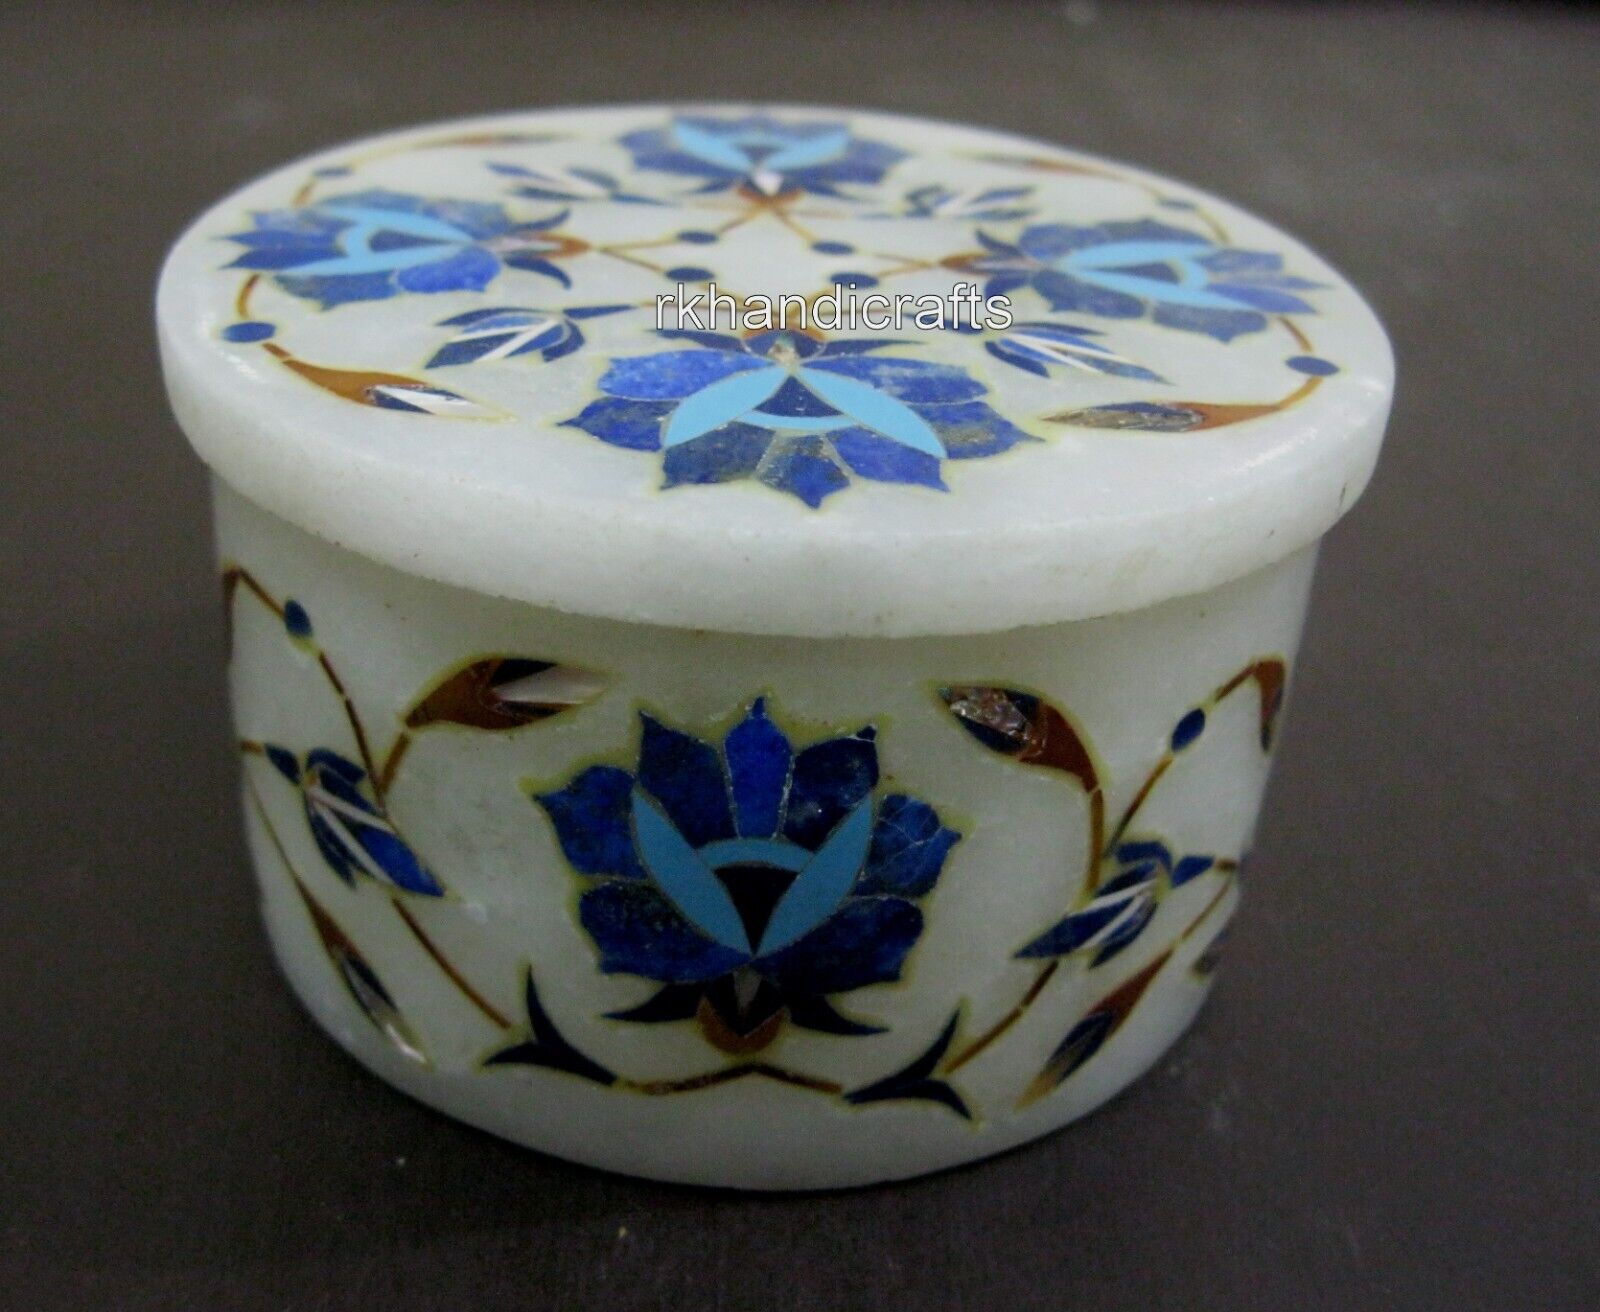 3 Inches Marble Trinket Box Inlaid with Floral Pattern from Indian Cottage Craft